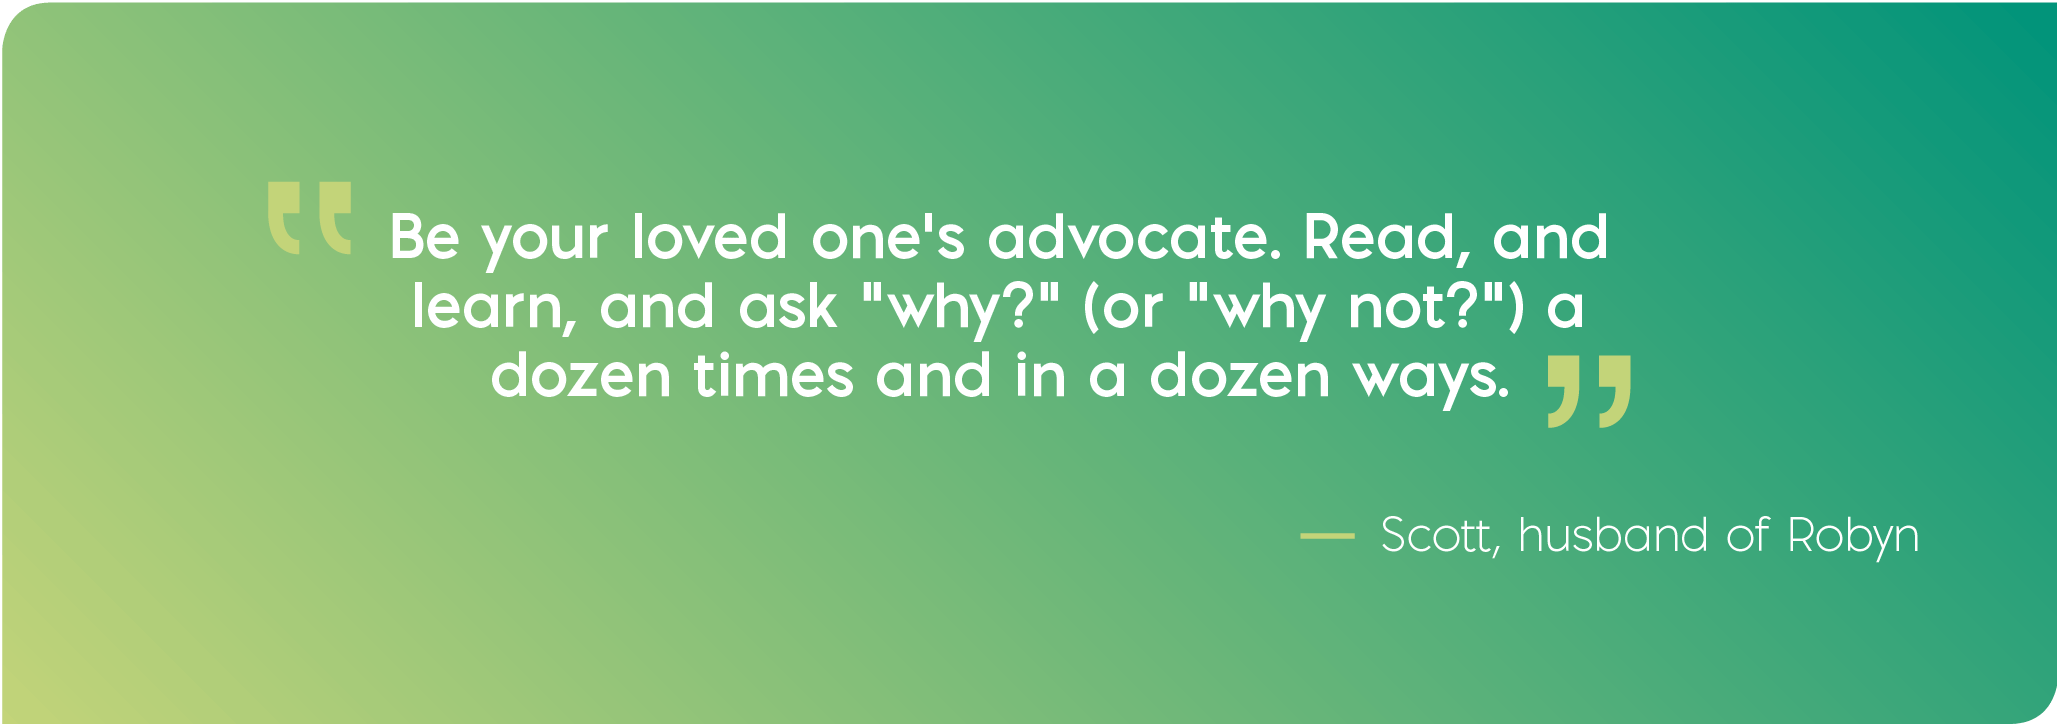 Be your loved one's advocate. Read, and learn, and ask "why?" (or "why not?") a dozen times and in a dozen ways. Quote from Scott, husband of Robyn